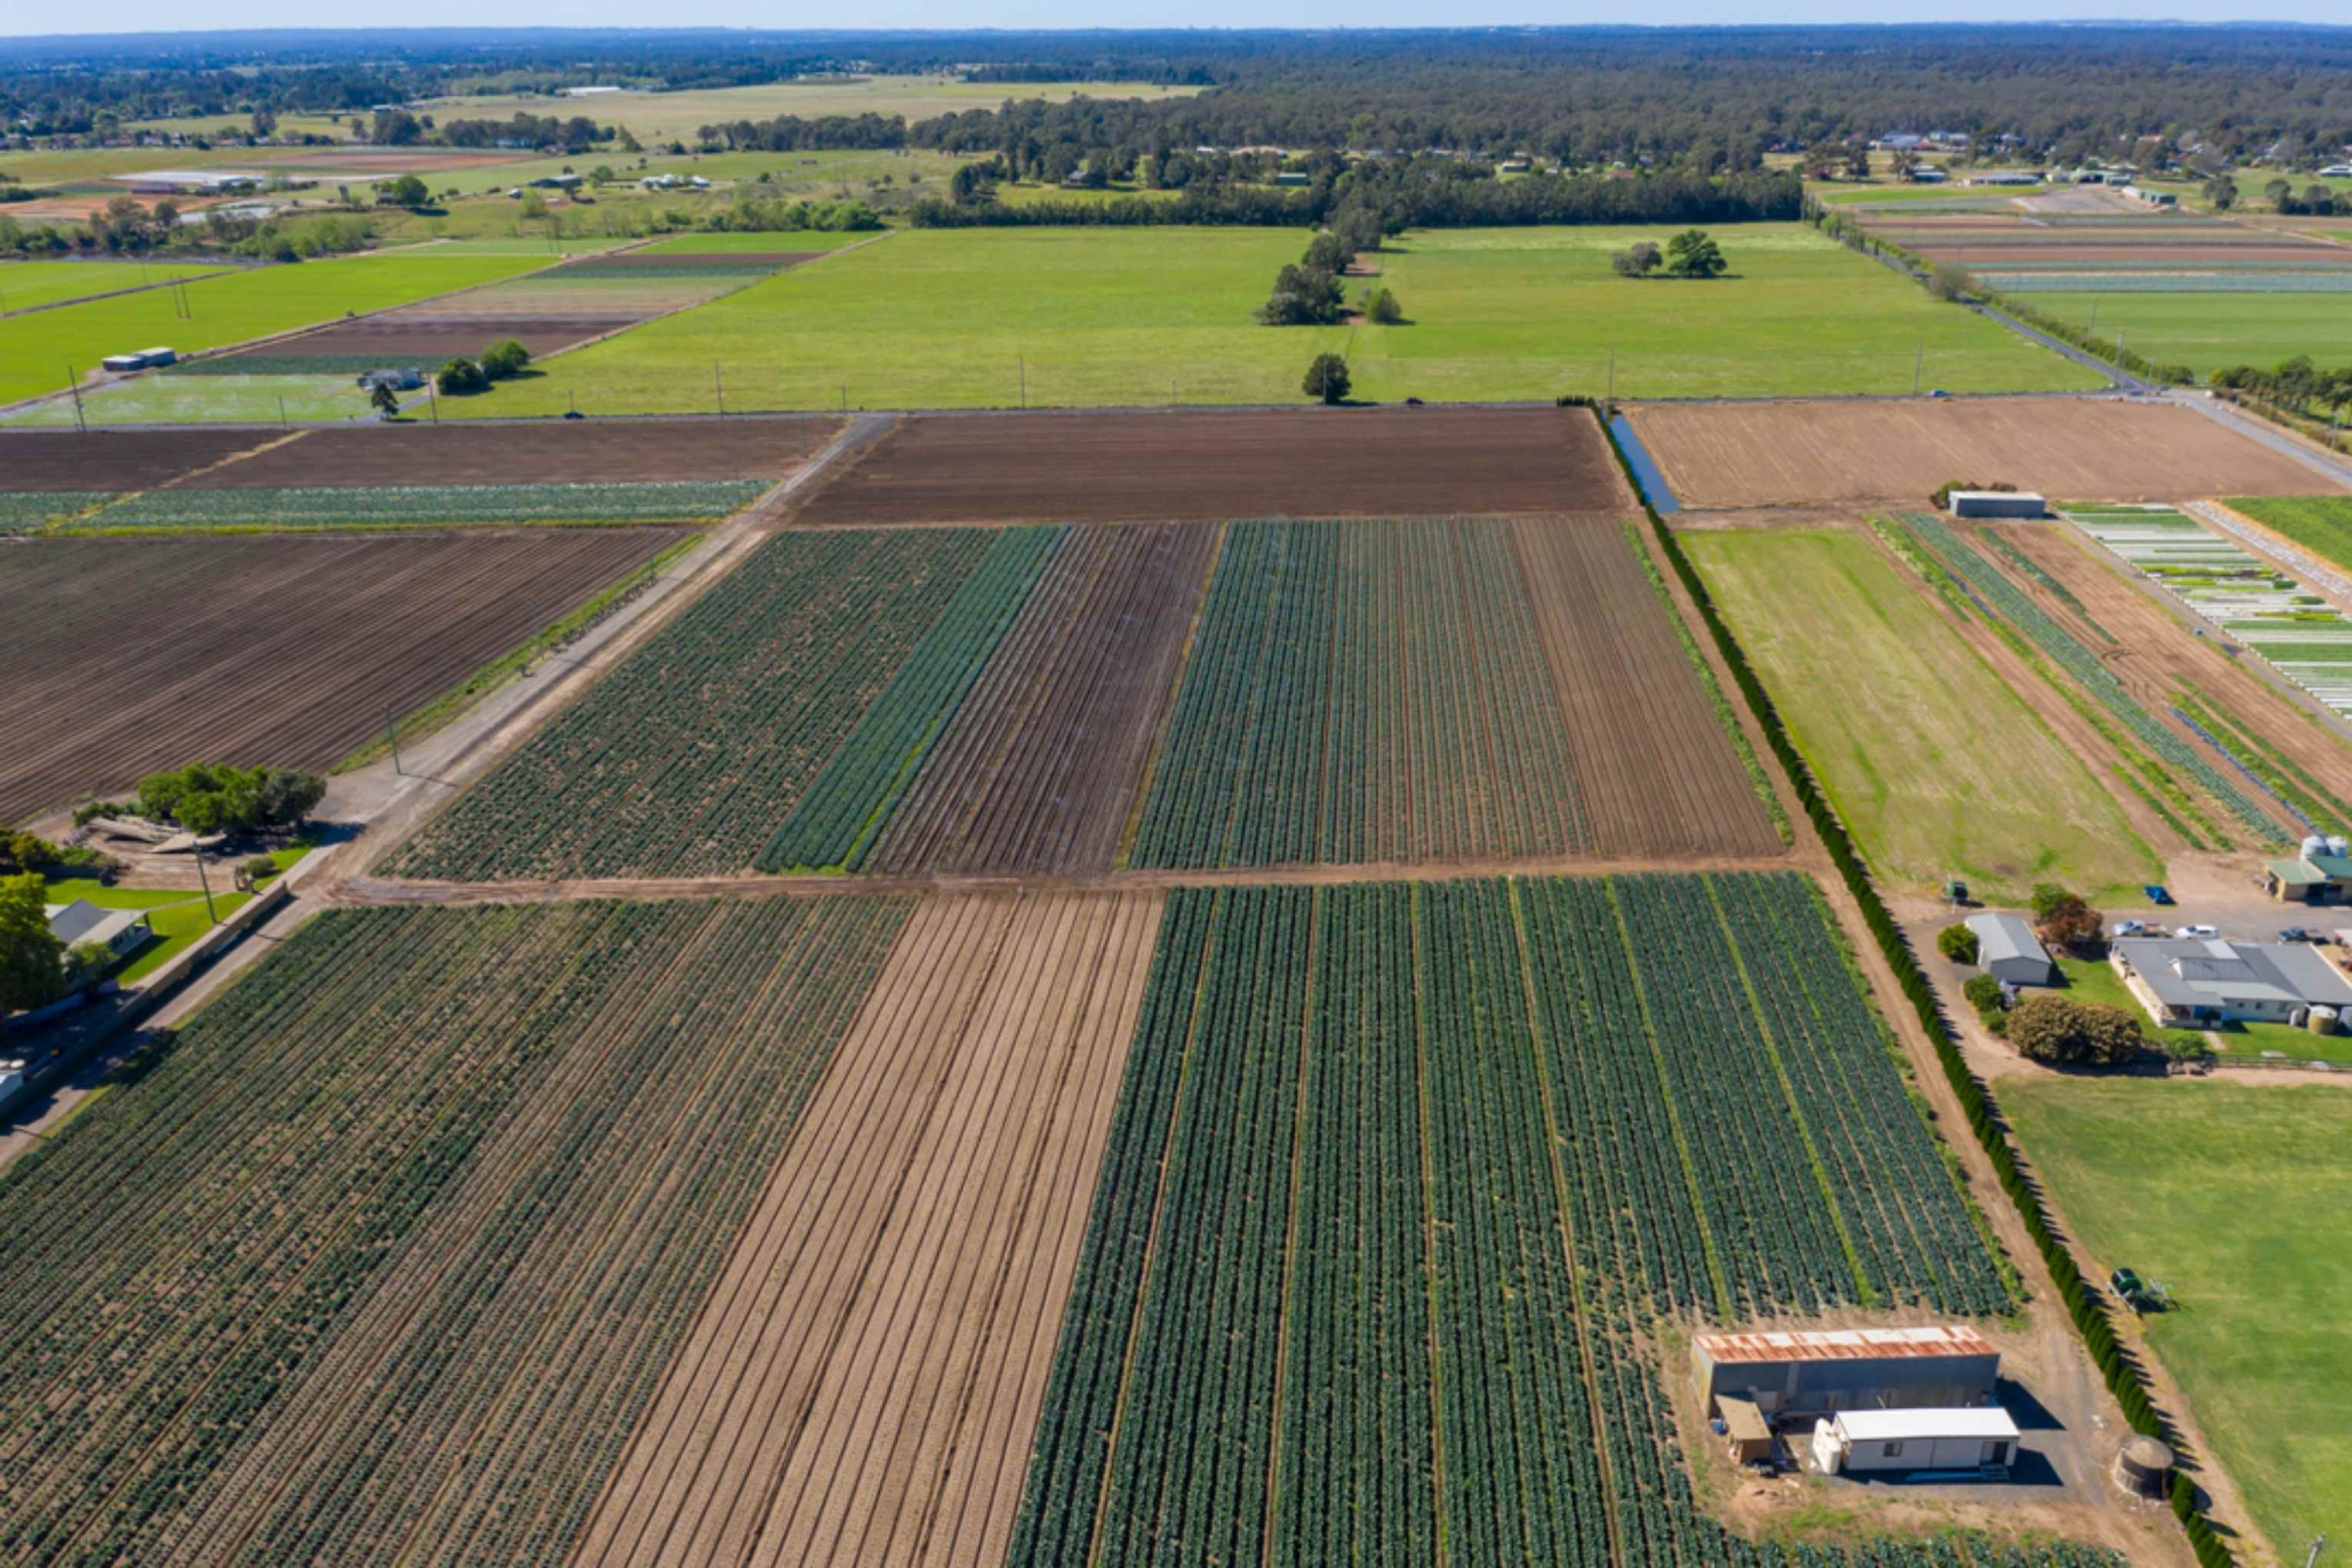 View of irrigated crops taken from the air